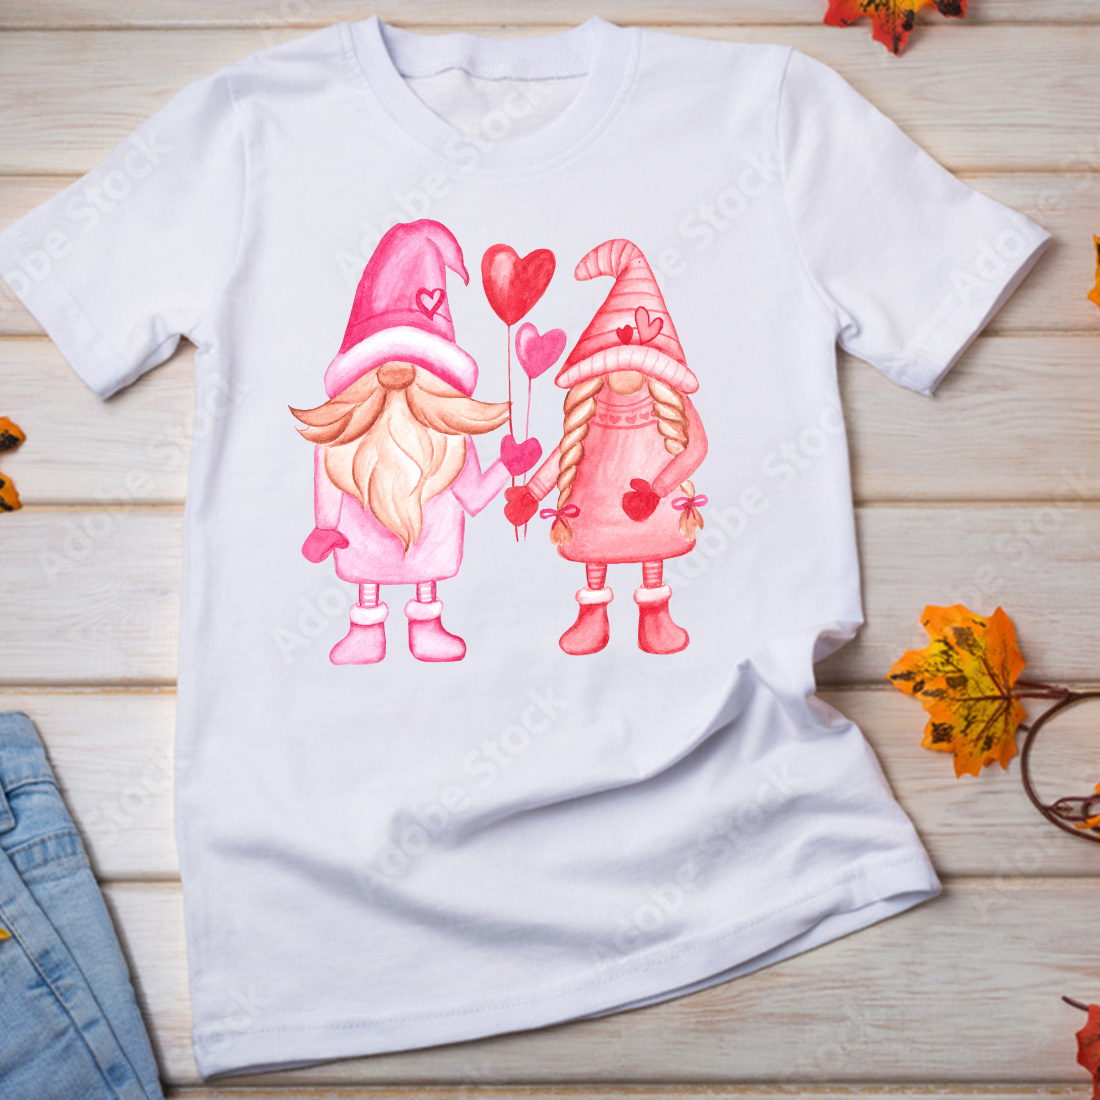 Image of a T-shirt with a beautiful print of pink gnomes